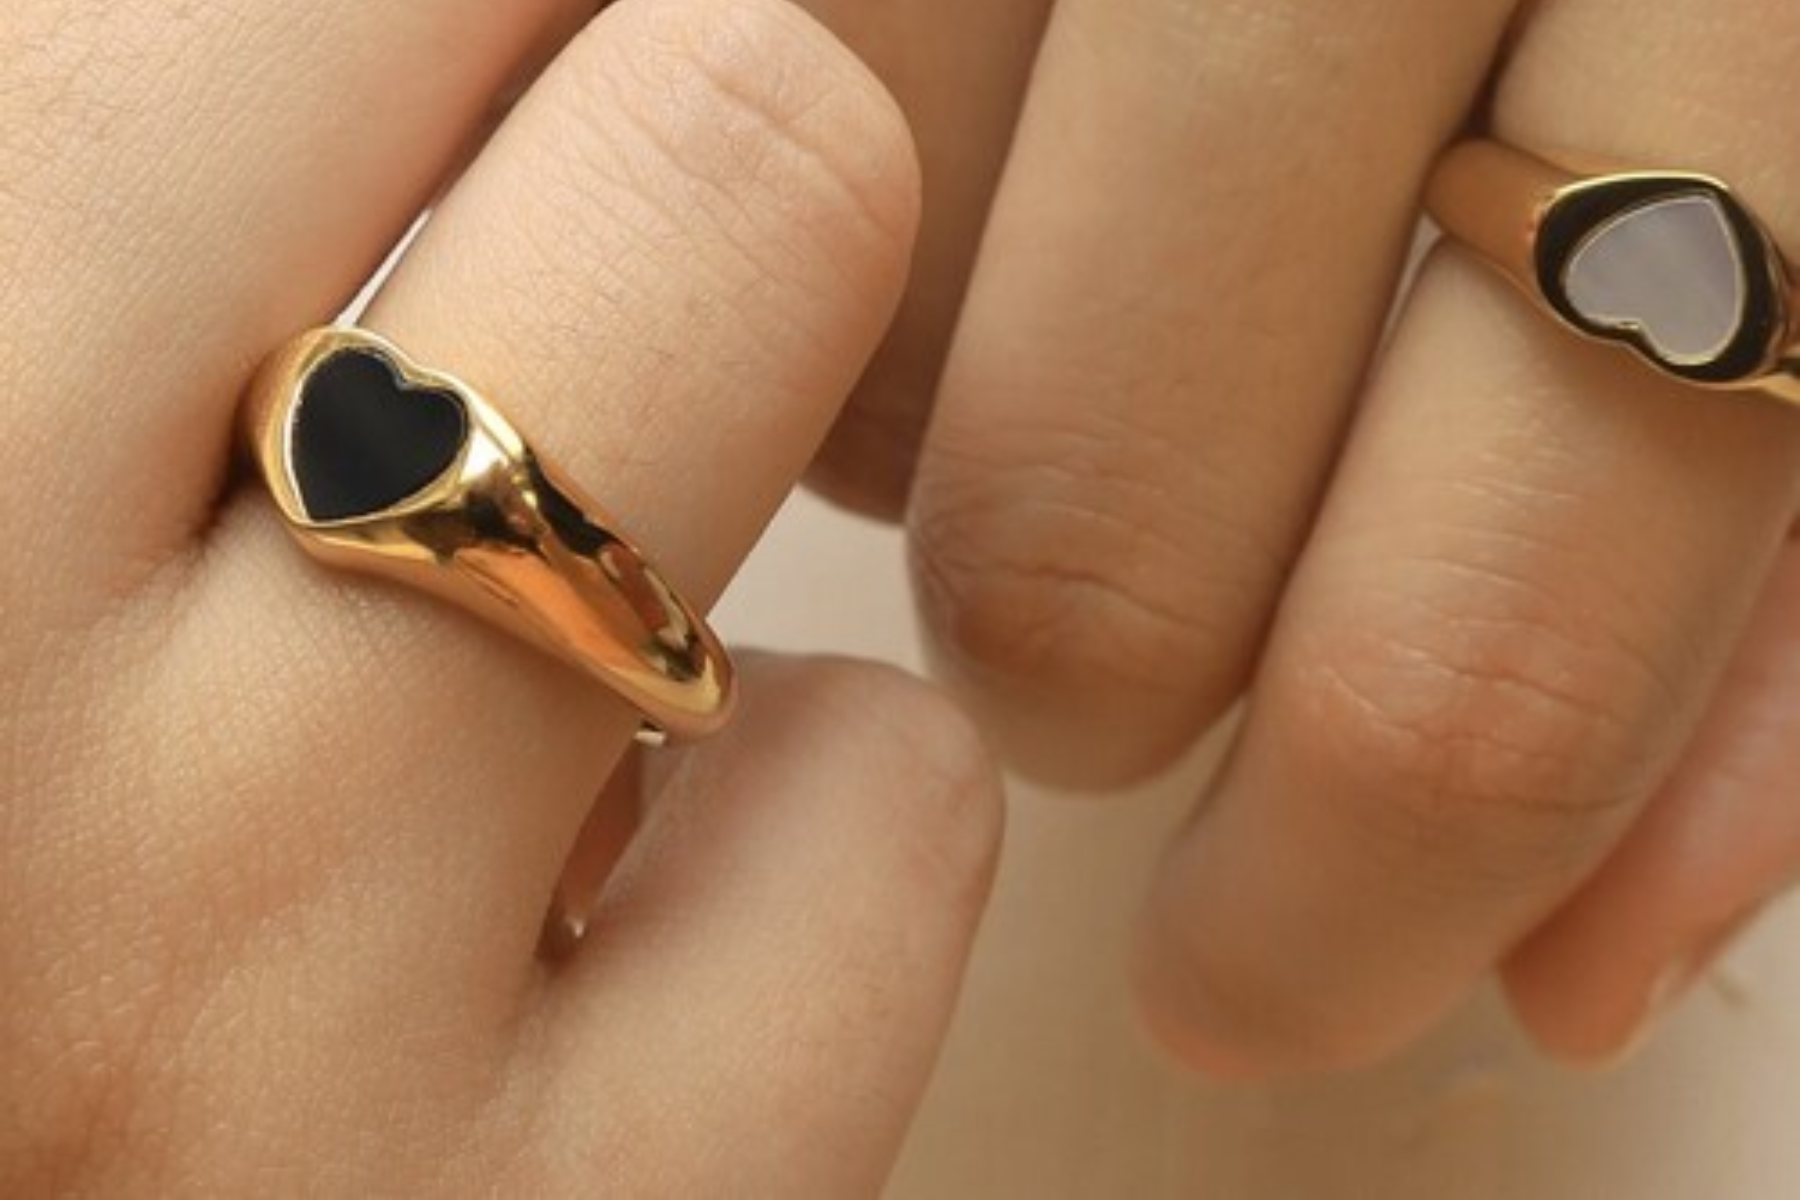 Two people's hands with heart-shaped rings